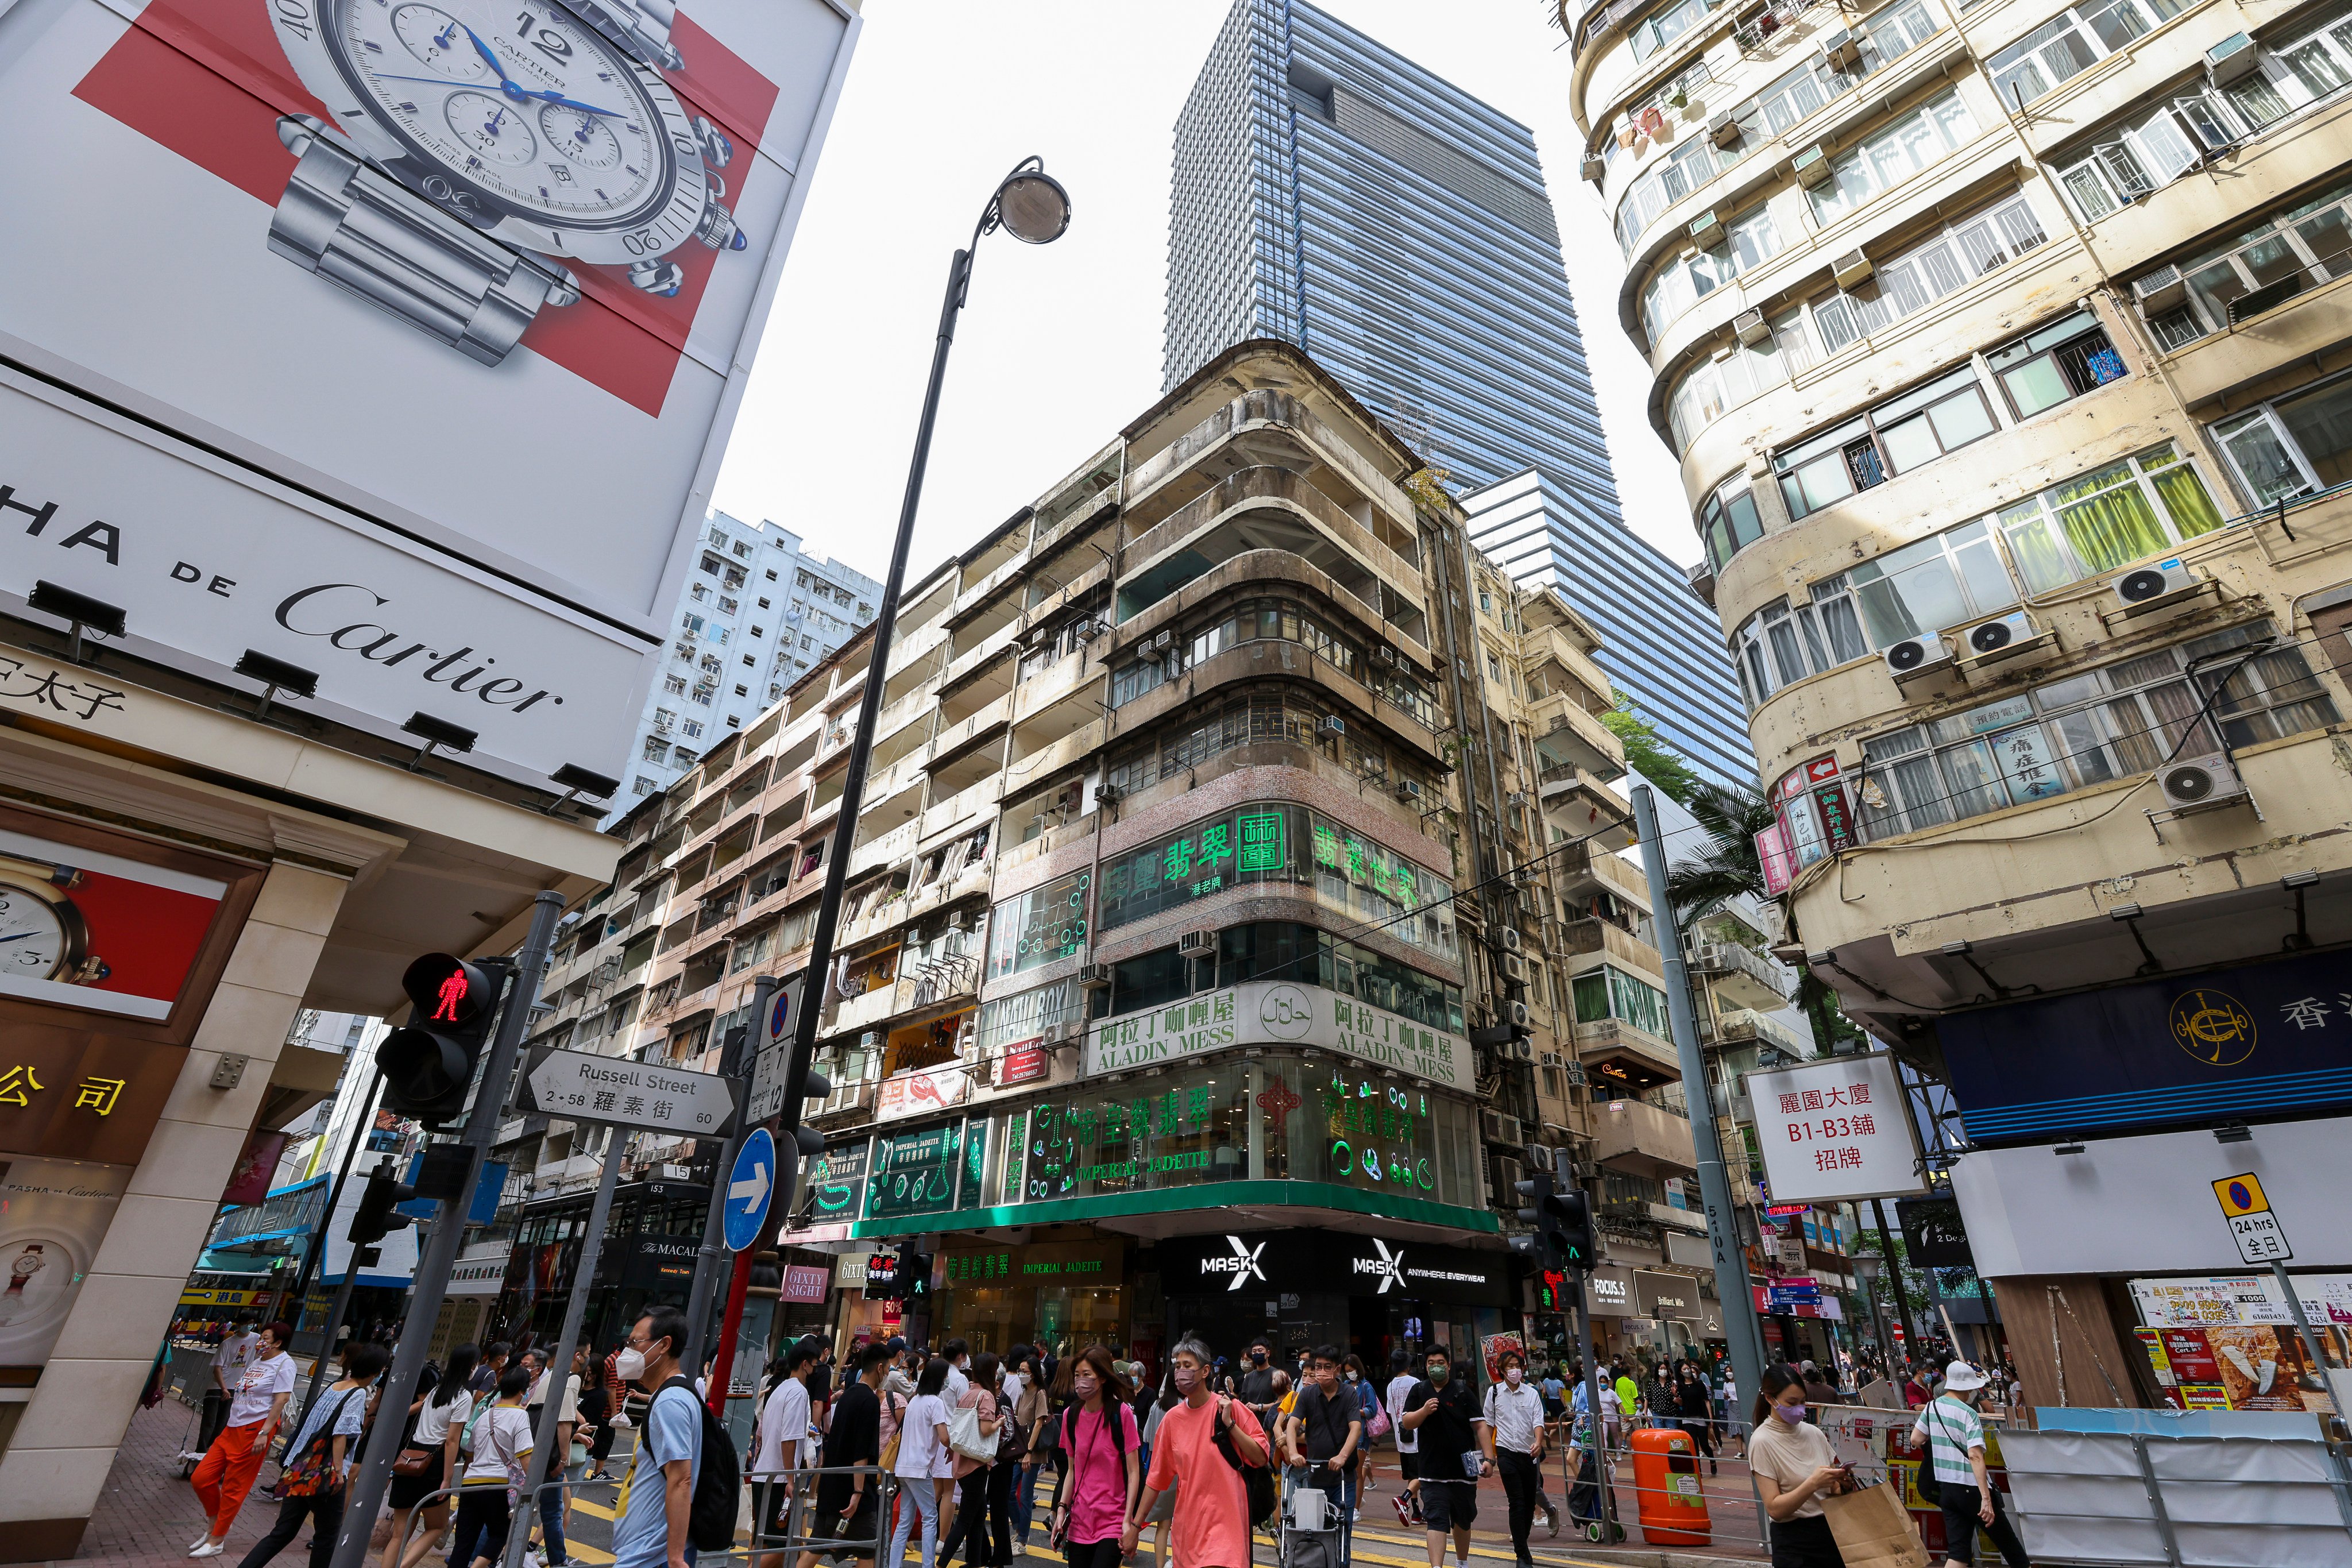 Local consumption holds the key to Hong Kong’s retail sector, say market observers. Photo: Nora Tam